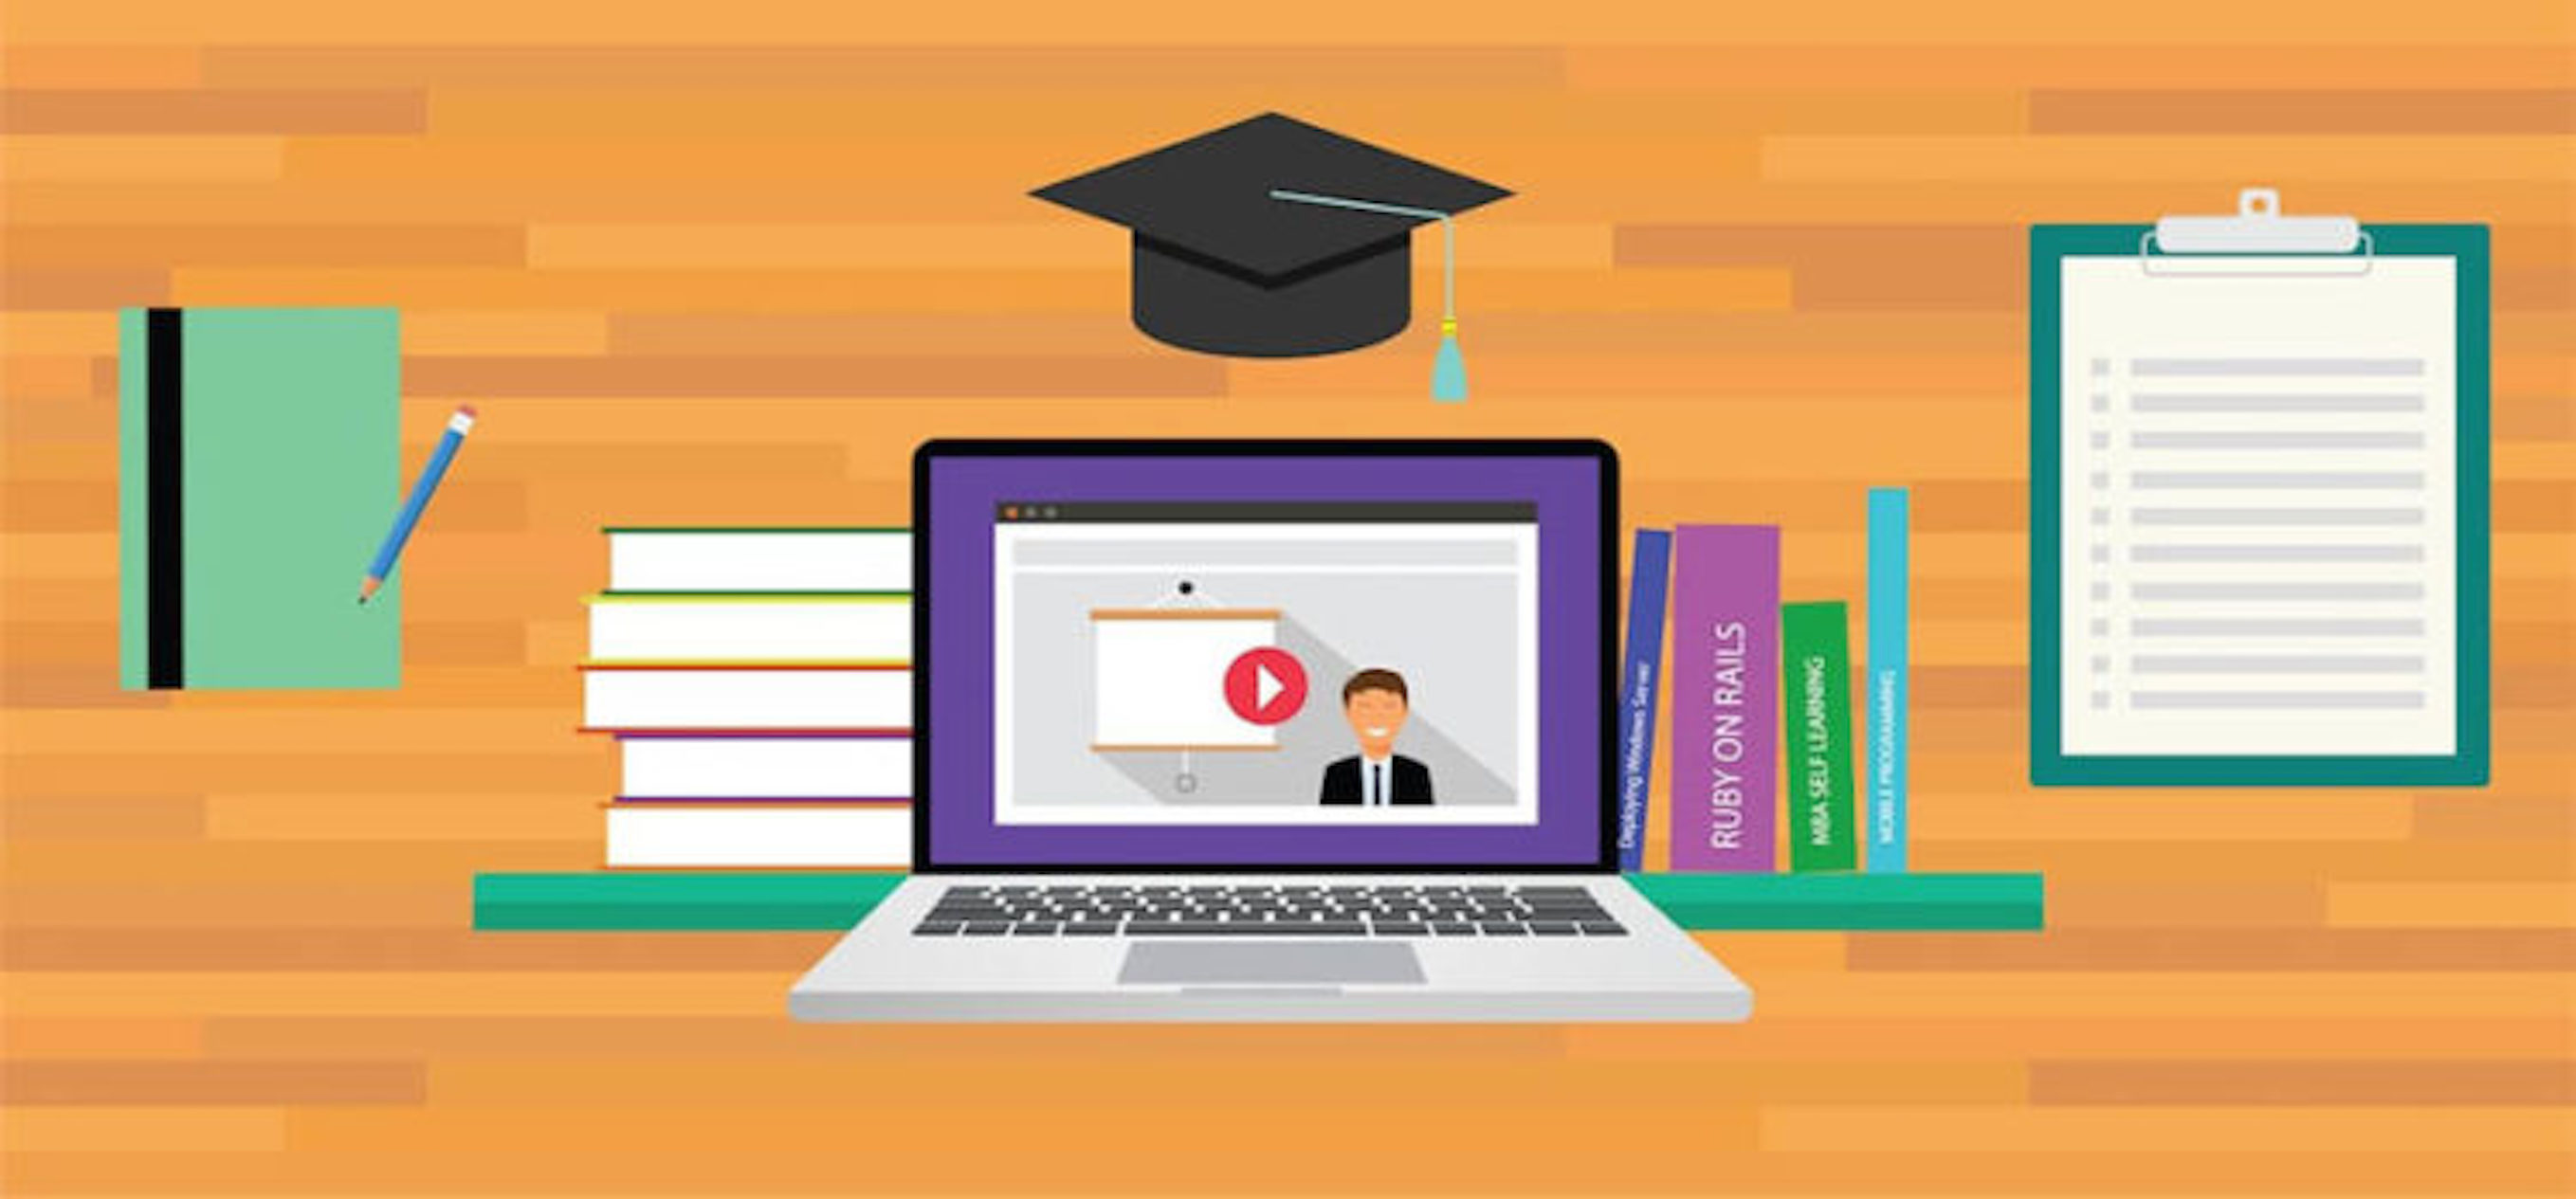 Getting Started with Your Online Course